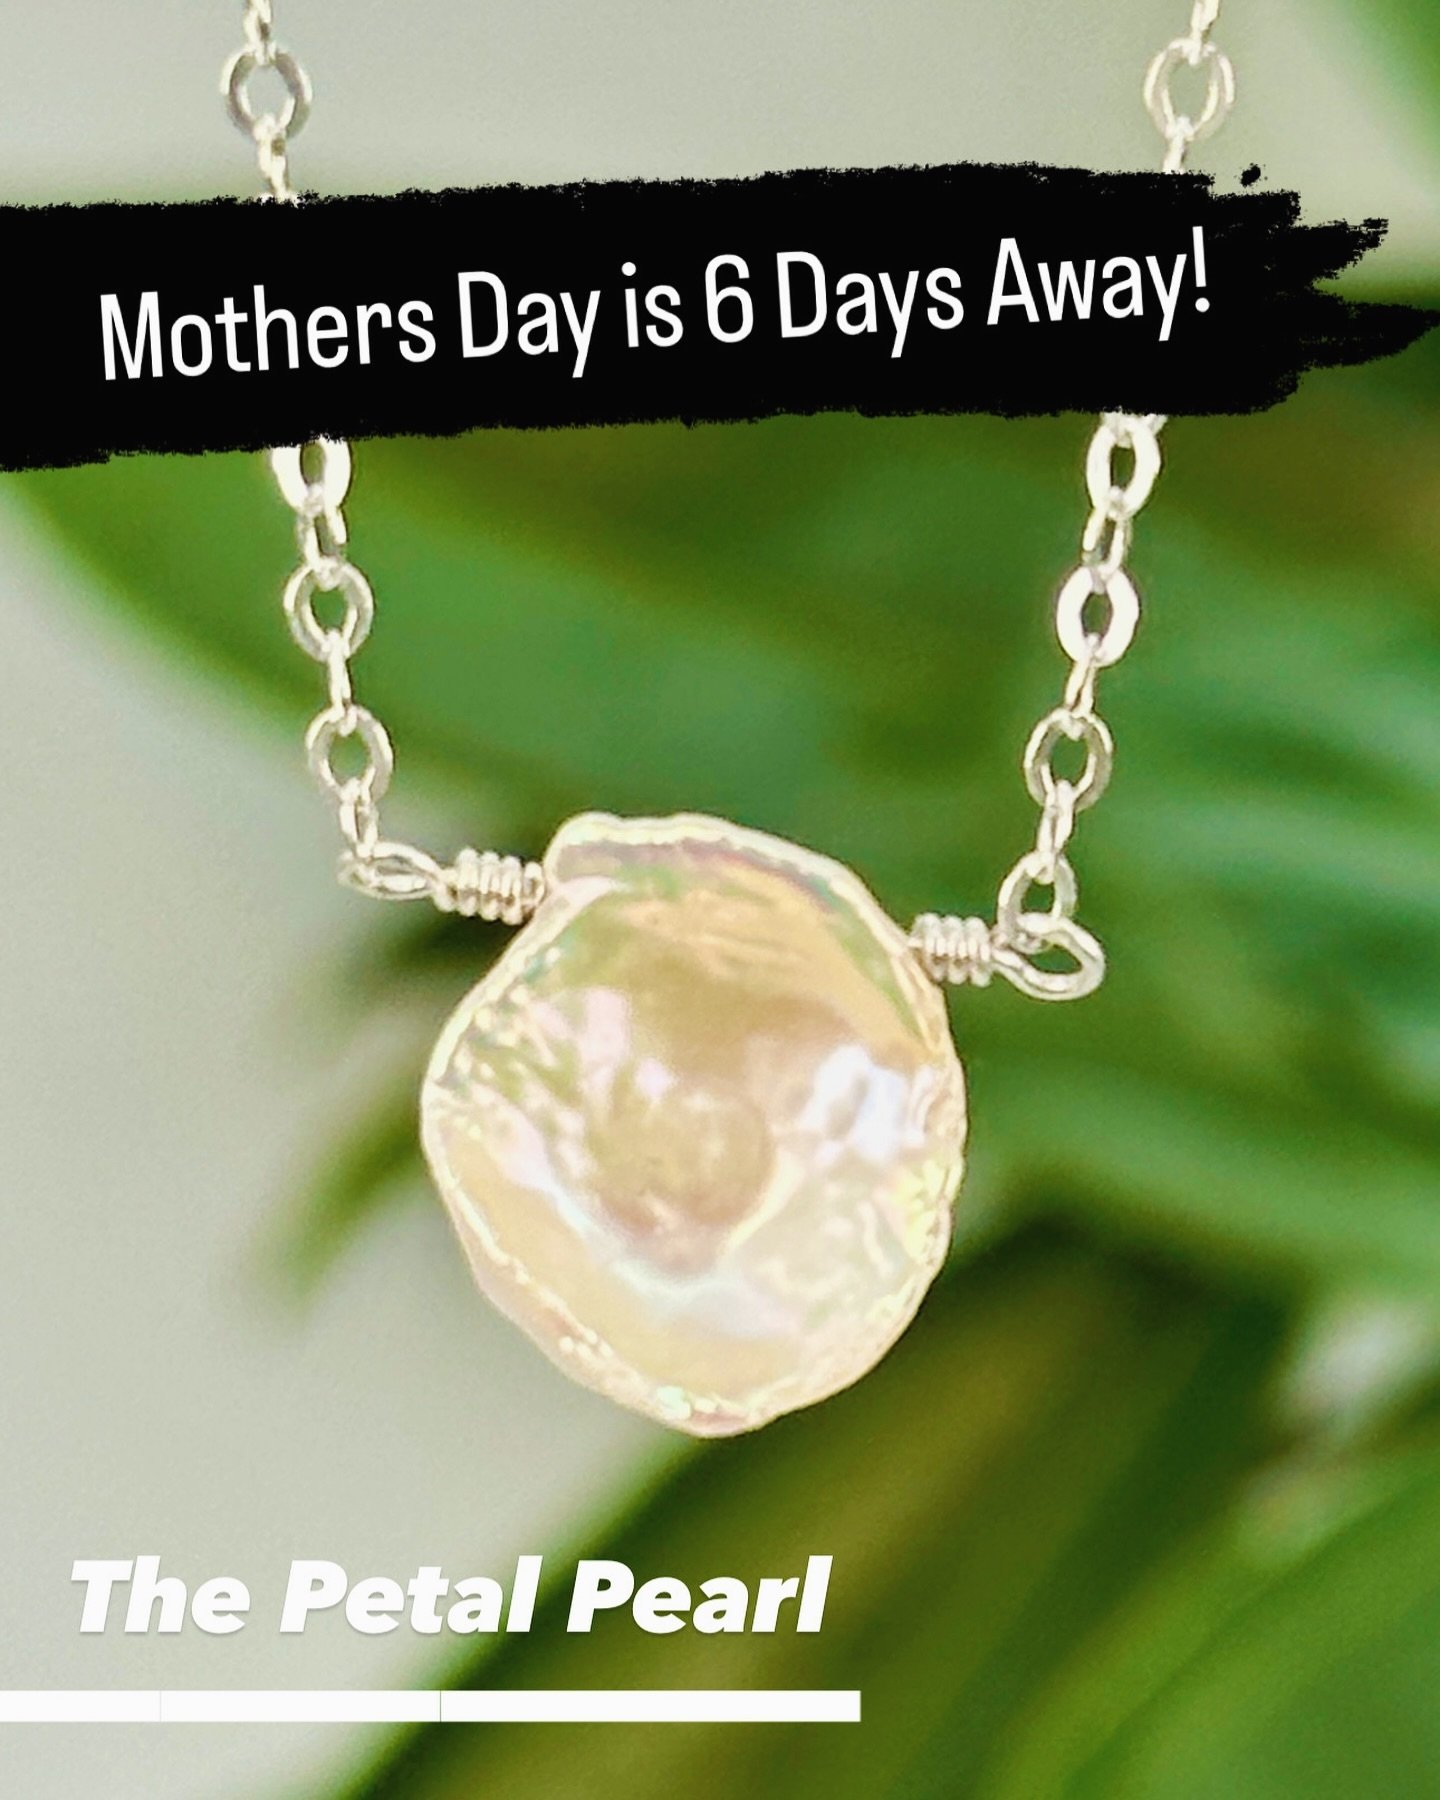 &hearts;️It's Not Too Late!! &hearts;️

🌸 This Mother's Day, surprise the special moms in your life with our beloved Petal Pearl necklace&mdash;a gift that never fails to delight! Elegant, timeless, and always appreciated, it&rsquo;s the perfect way